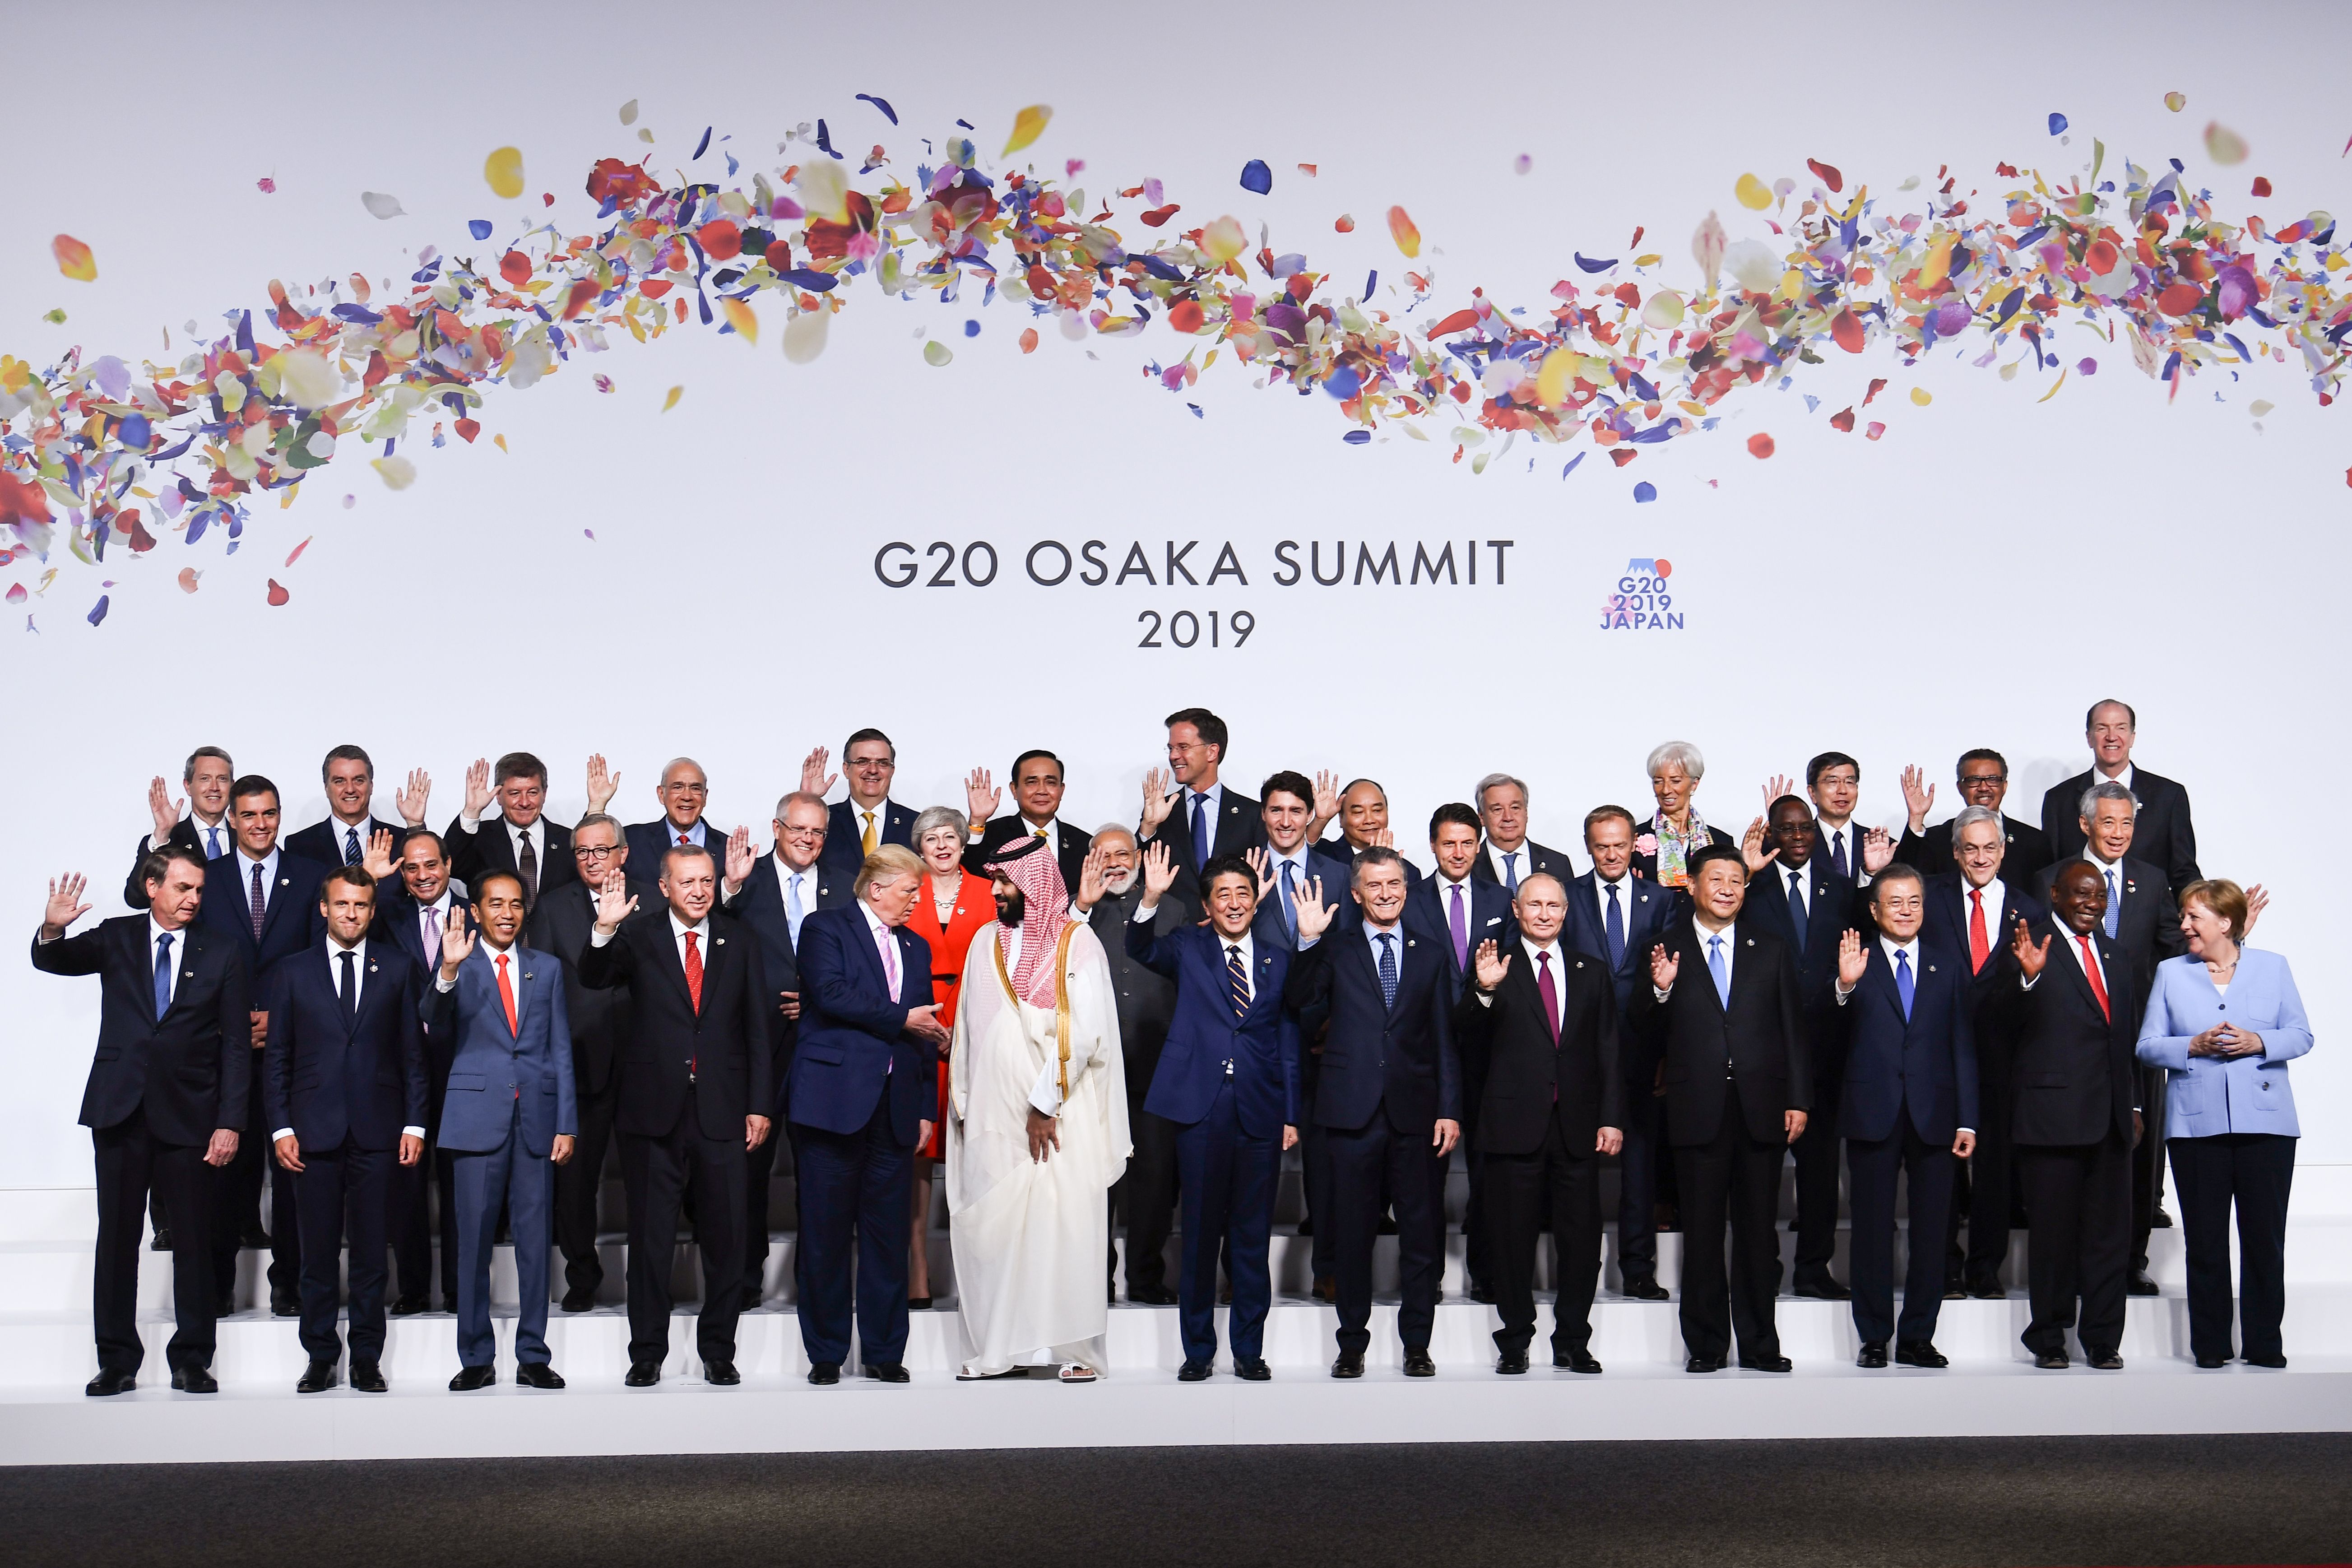 Trump and Mohammed bin Salman talk during the G20 group photo in Osaka, Japan, on Friday, June 28.